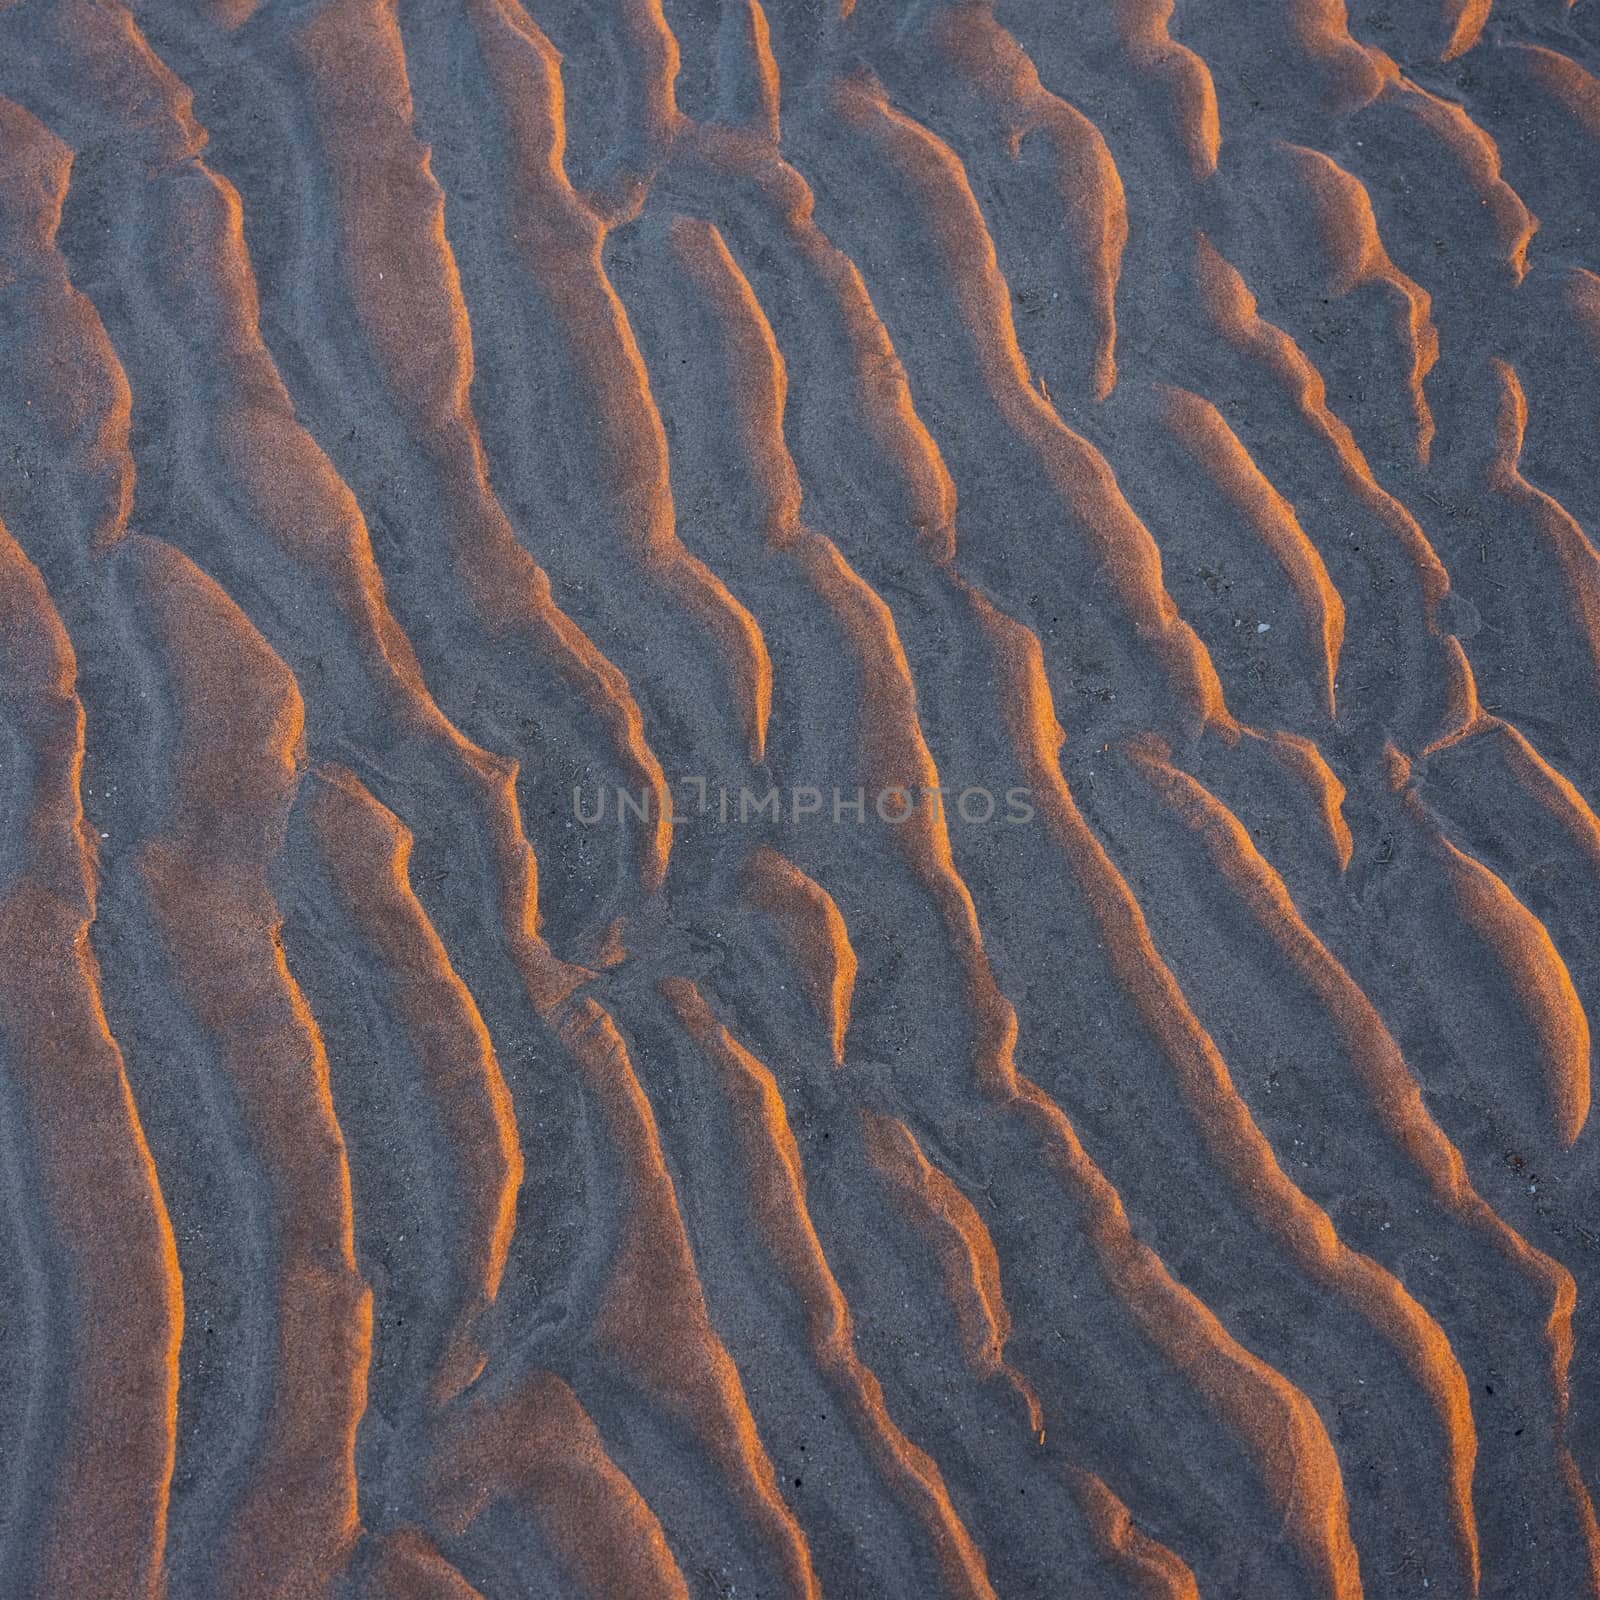 abstract pattern of sand ripples on beach in warm light of setting sun